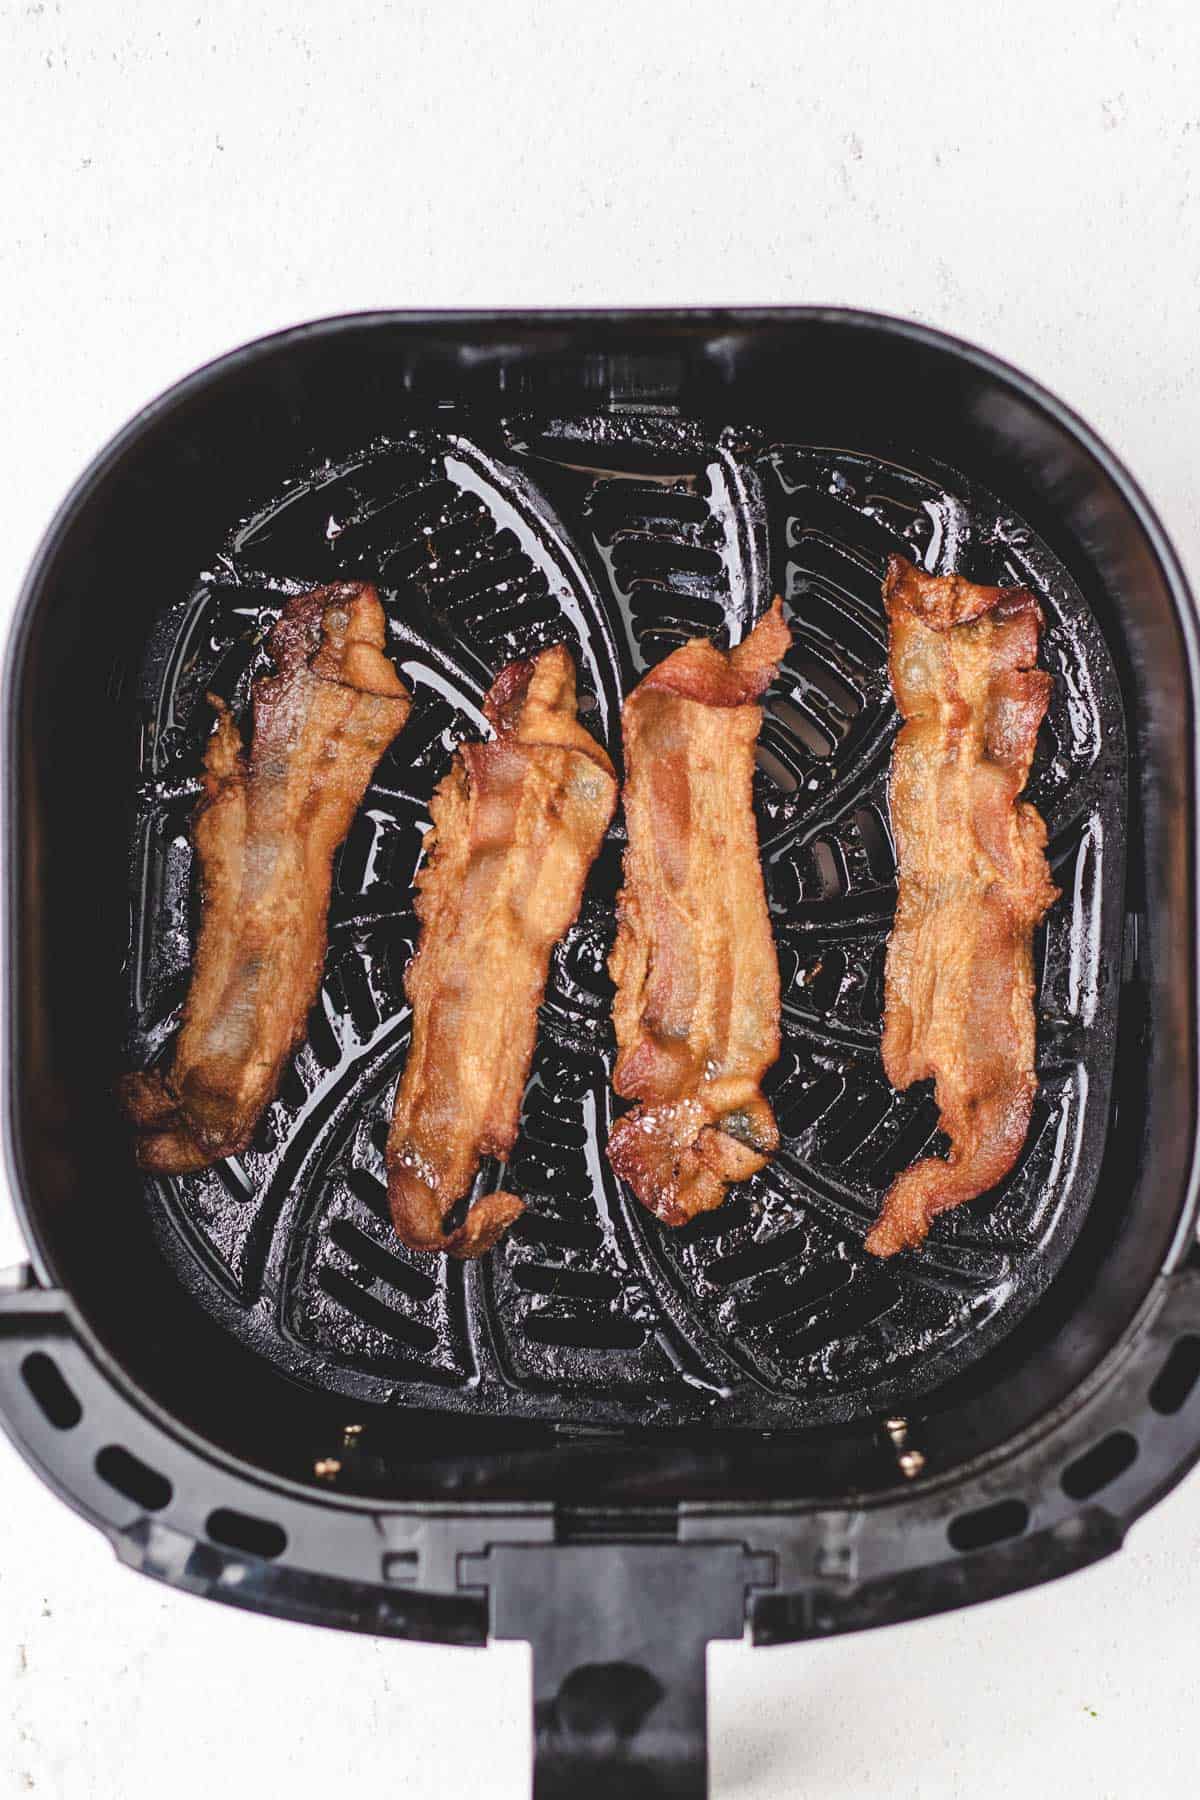 Cooked bacon in an air fryer basket.